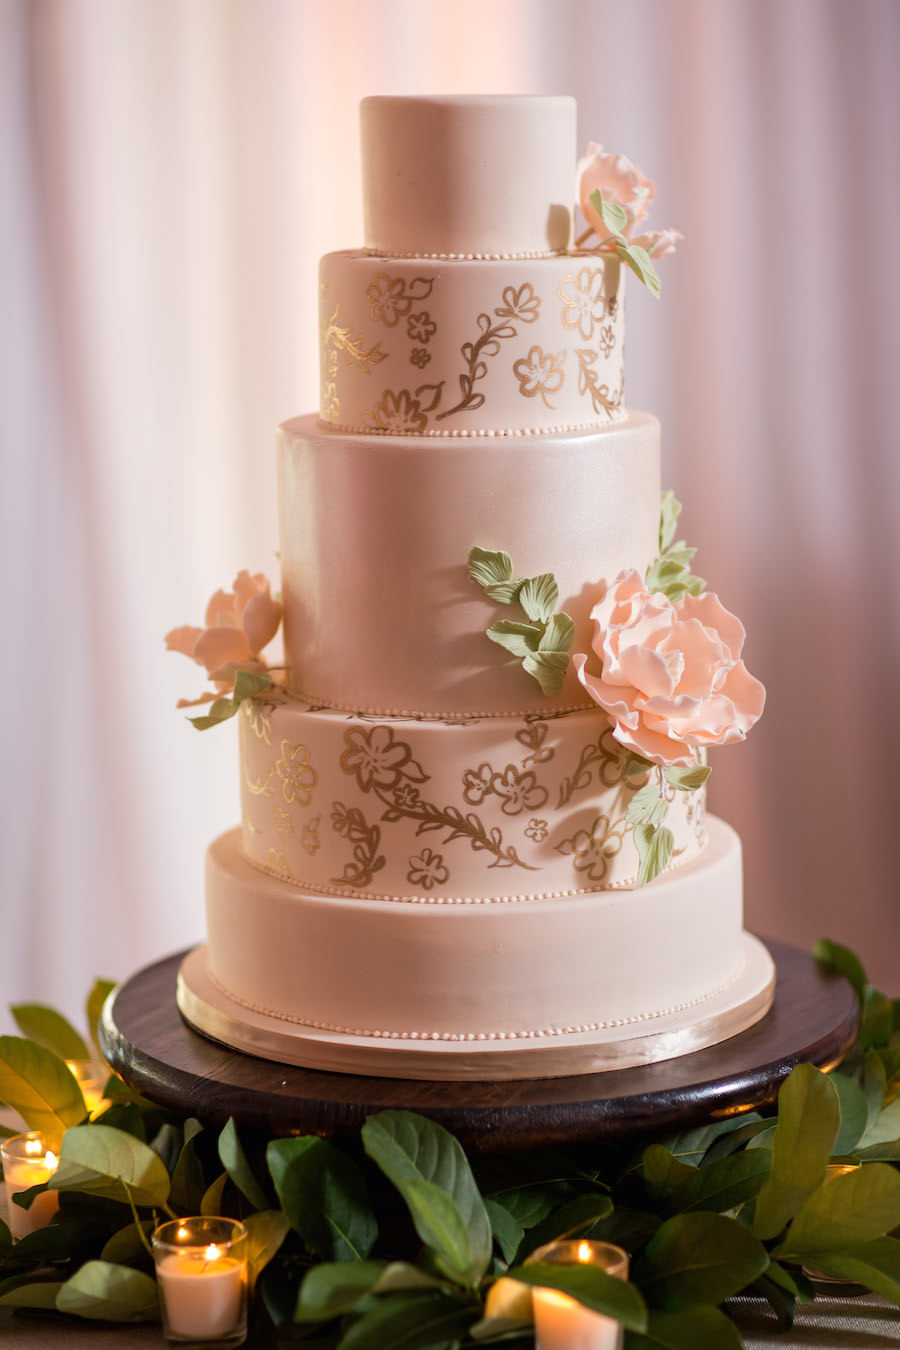 Five Tiered Blush and Pink Wedding Cake with Gold Handpainted Accents with Blush Pink Sugar Flowers on Wooden Cake Stand | Tampa Wedding Cakes and Desserts Hands on Sweets